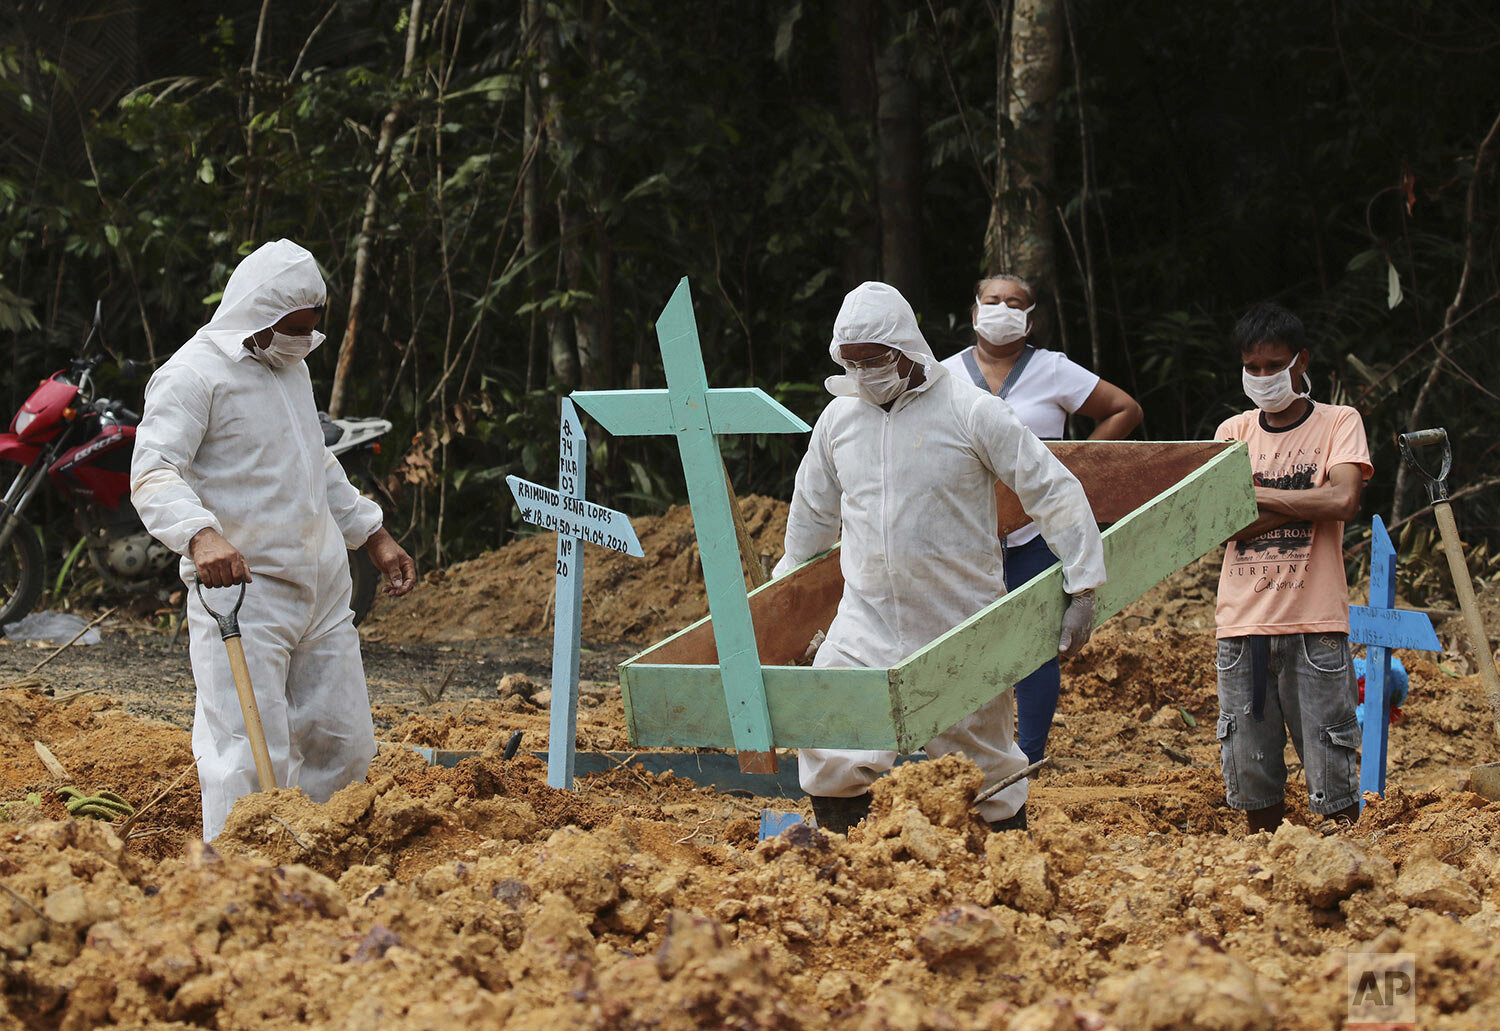  Funeral workers in protective gear prepare a grave at the Nossa Senhora Aparecida cemetery, for a woman who is suspected to have died of COVID-19, in Manaus, Amazonas state, Brazil, April 16, 2020. (AP Photo/Edmar Barros) 